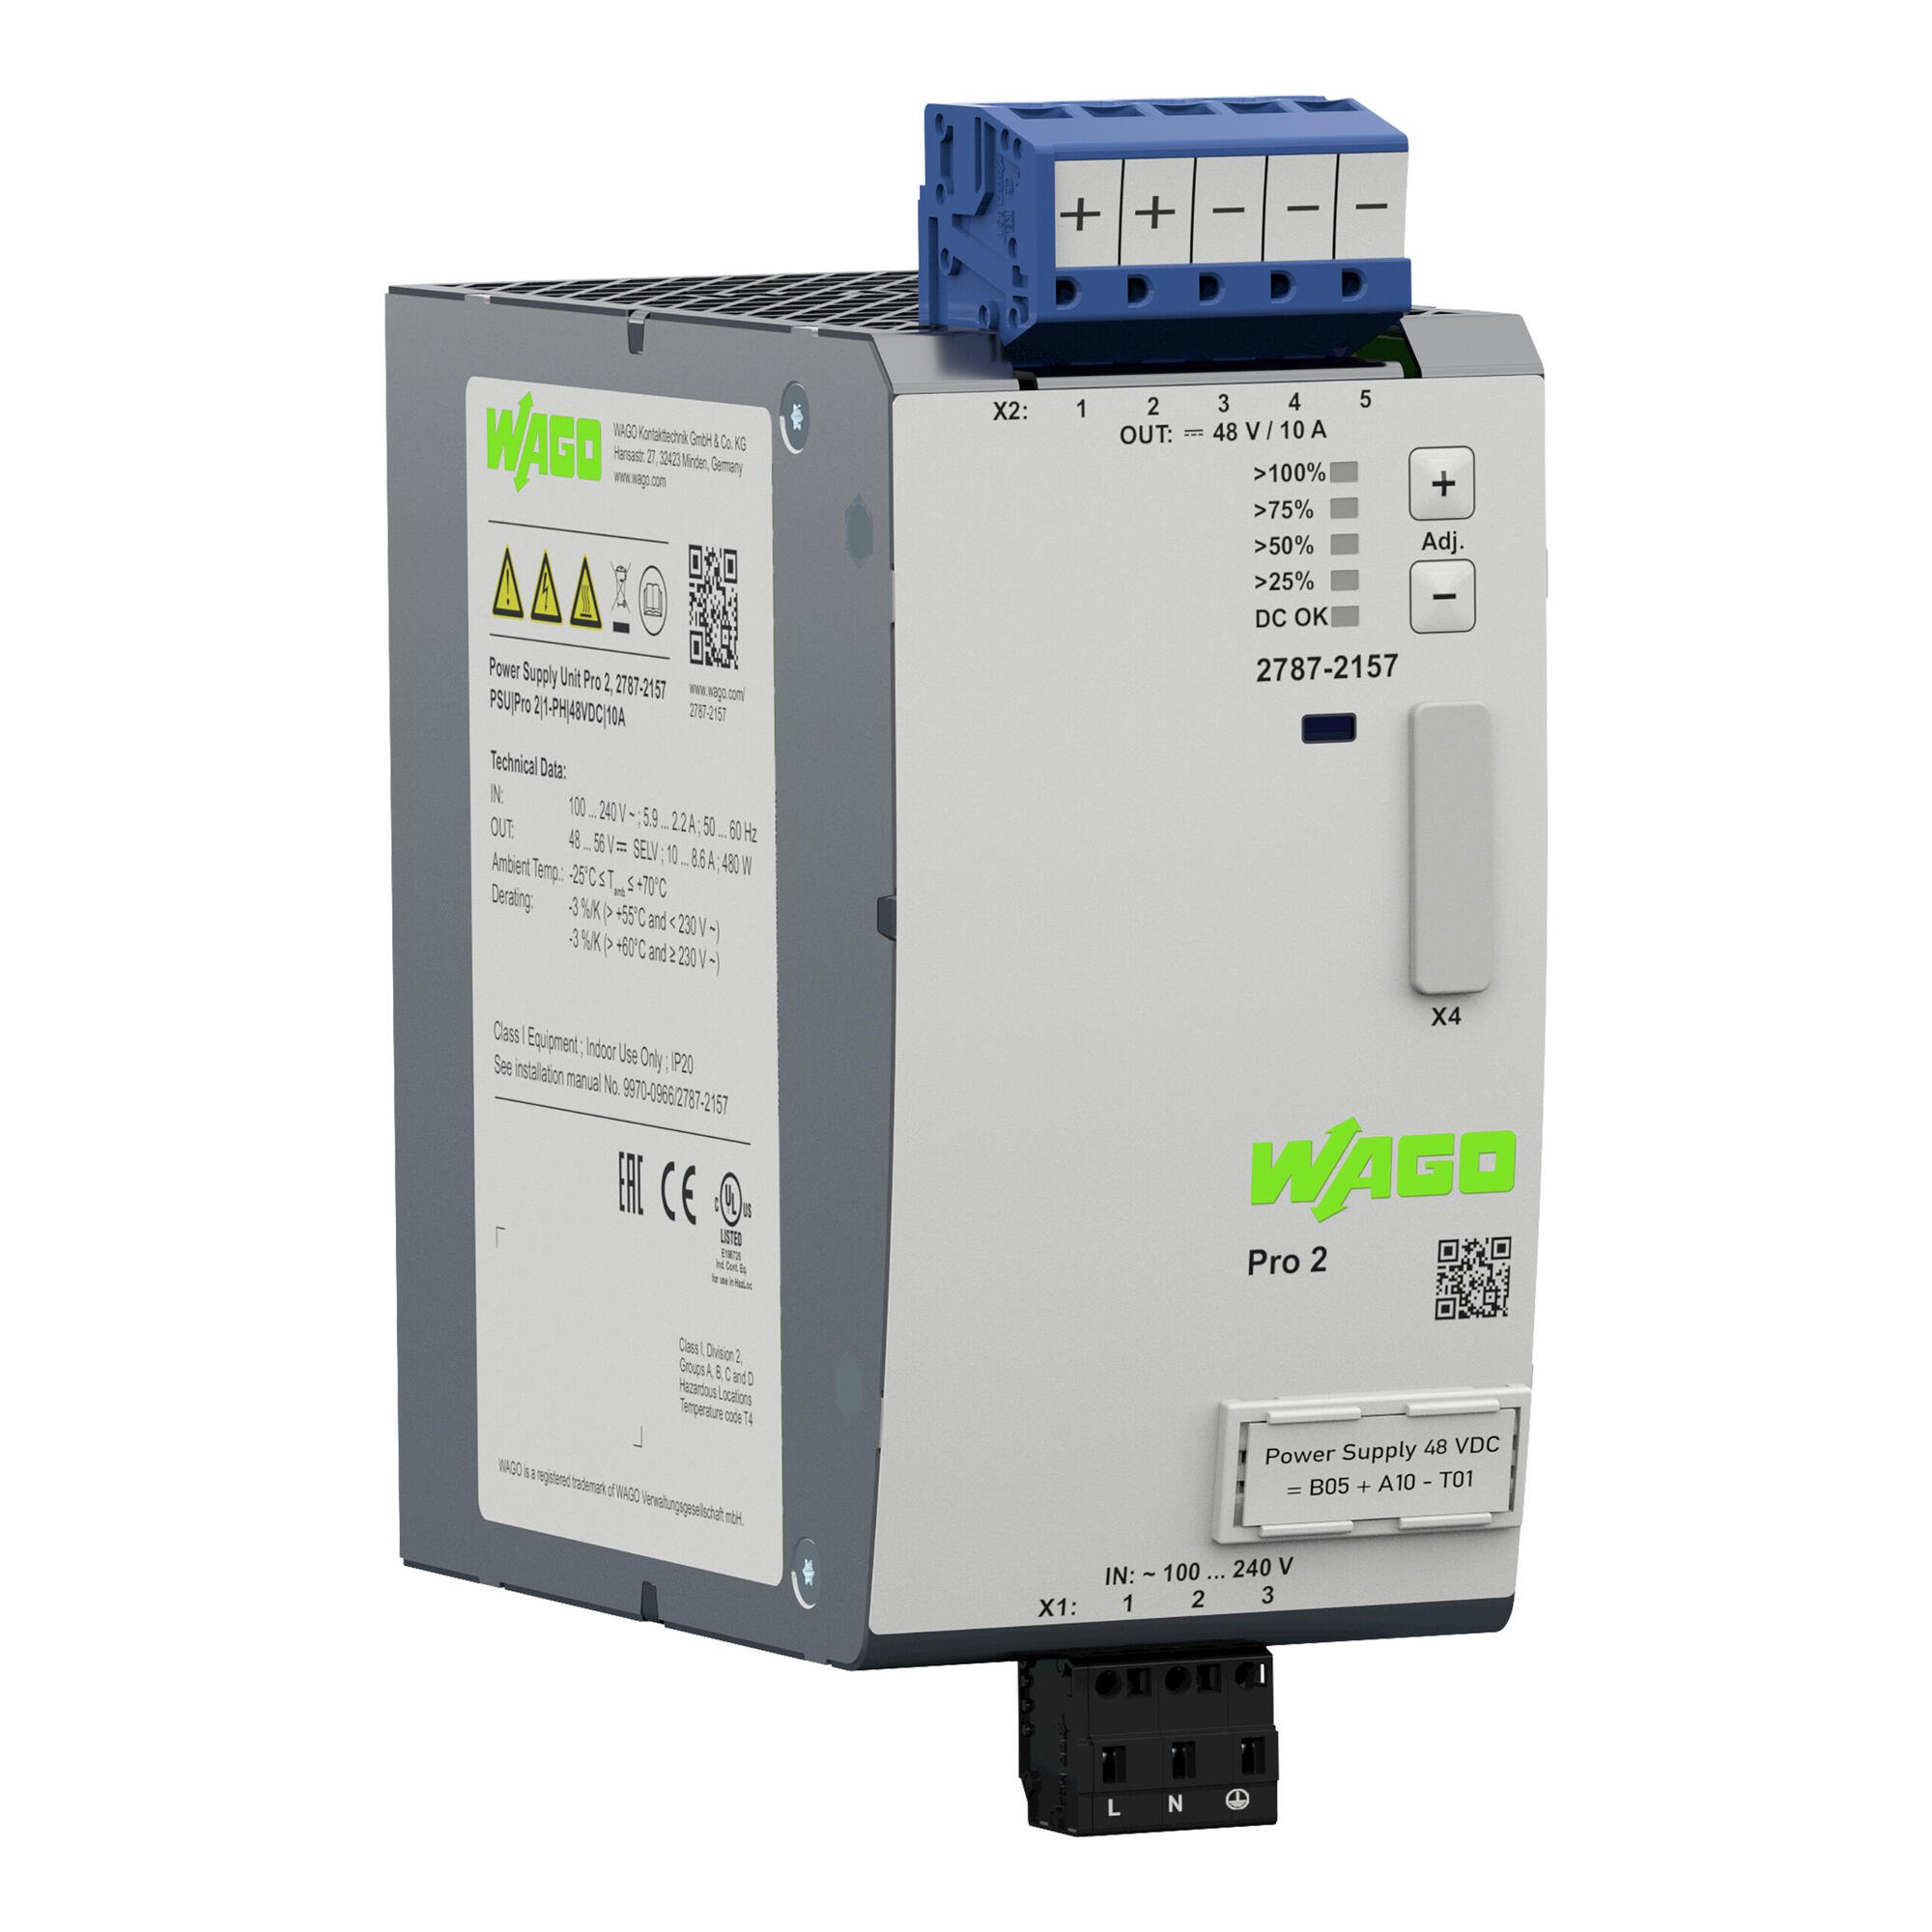 Power supply; Pro 2; 1-phase; 48 VDC output voltage; 10 A output current; TopBoost + PowerBoost; communication capability